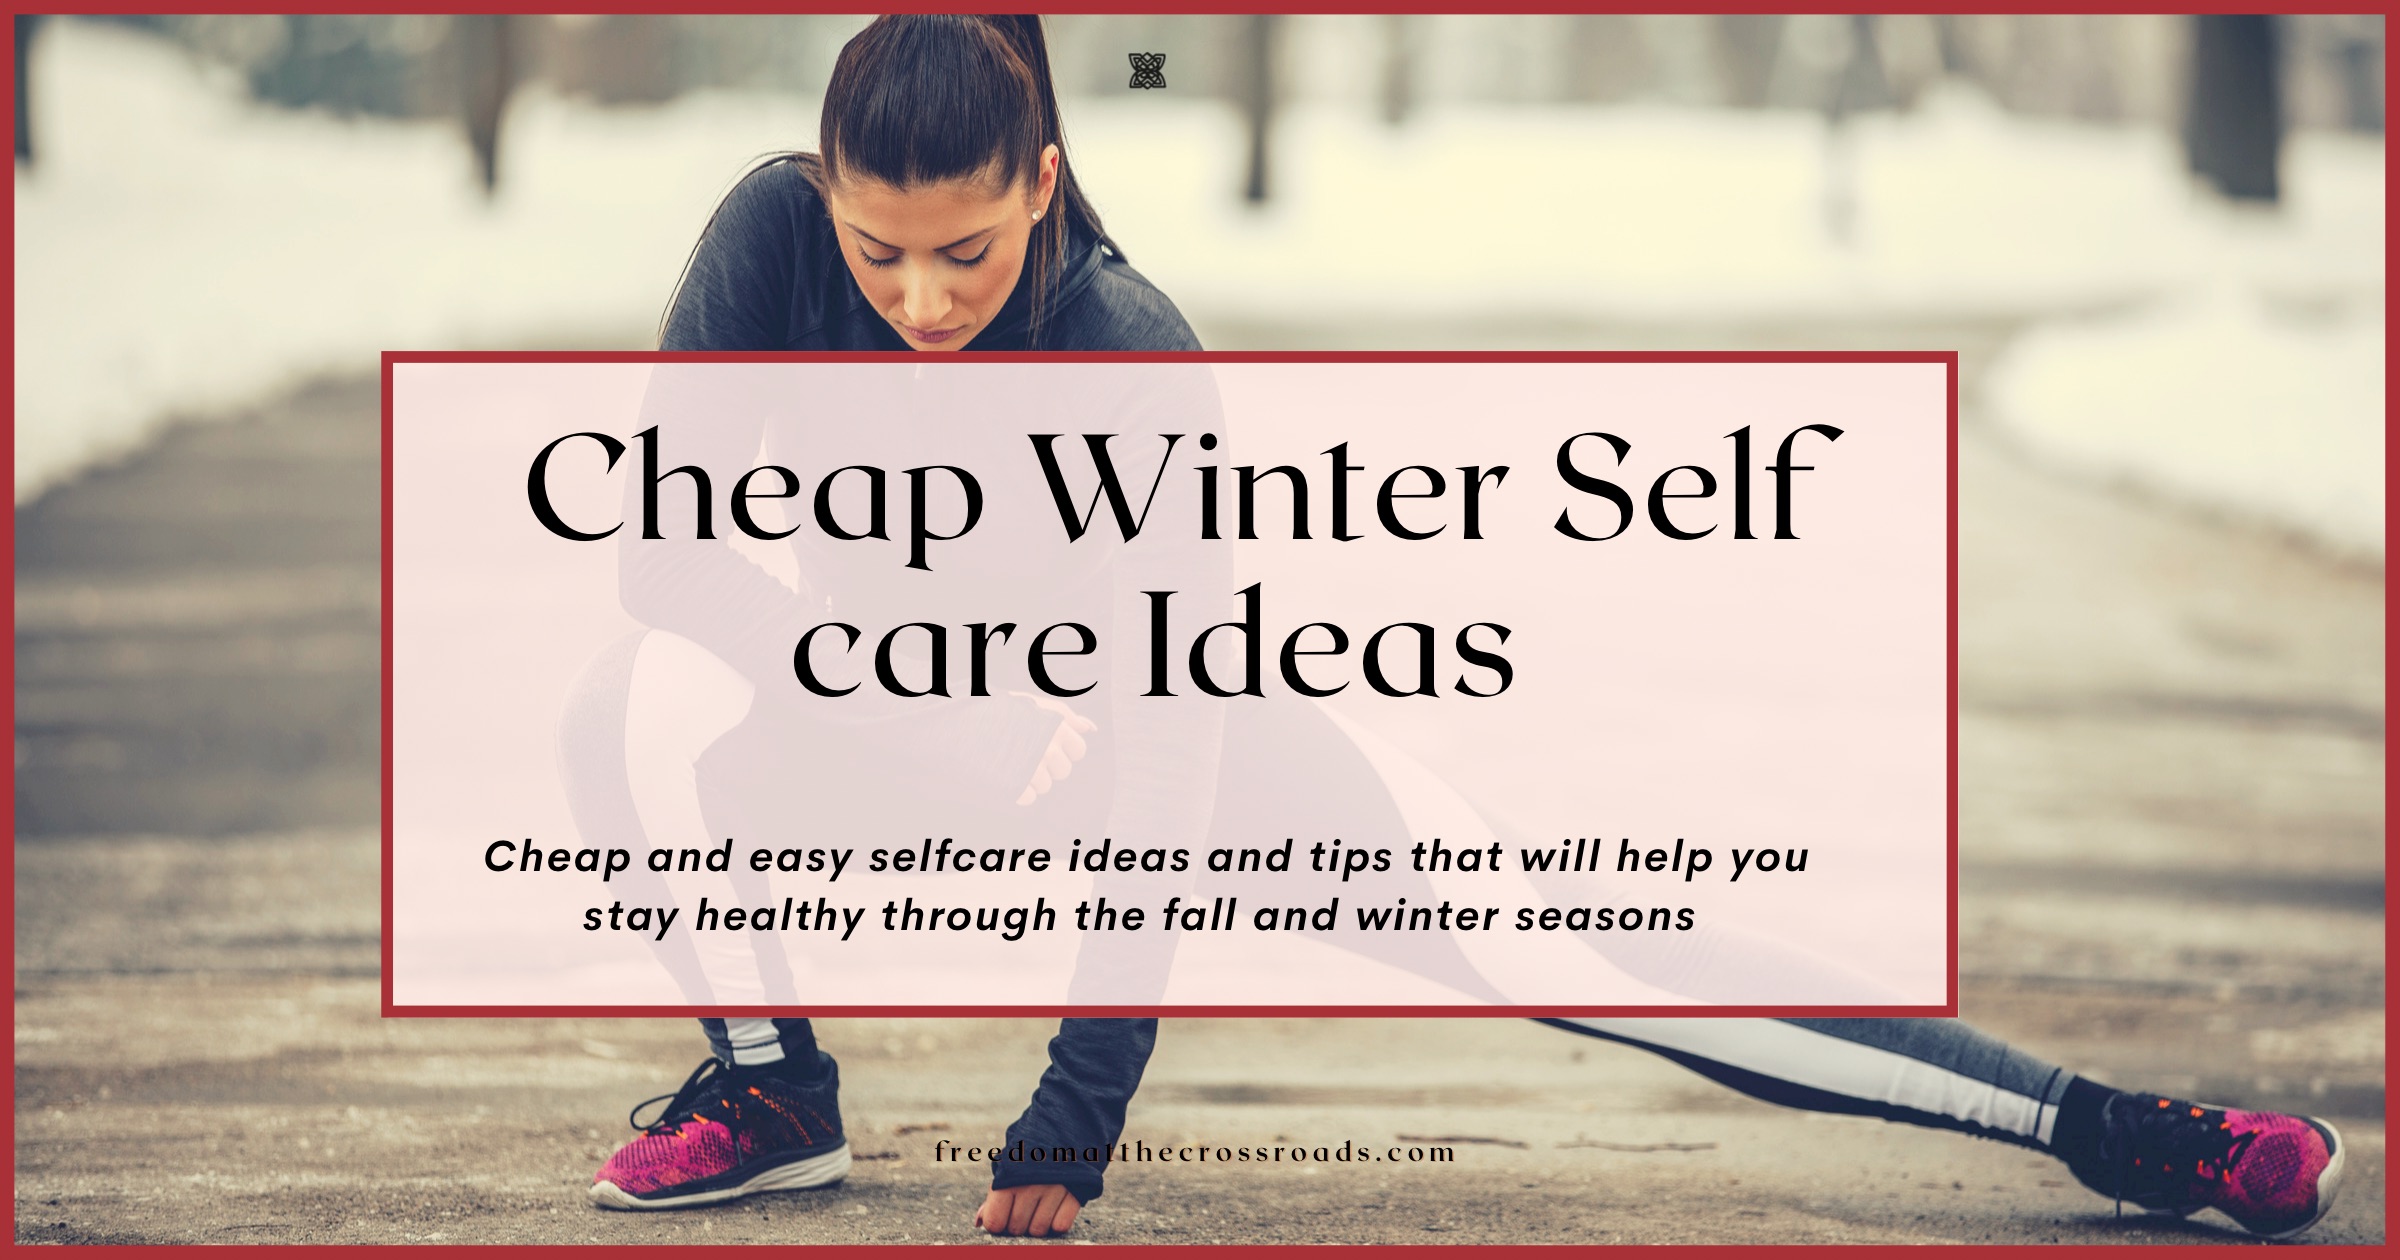 Cheap winter selfcare ideas blog post image